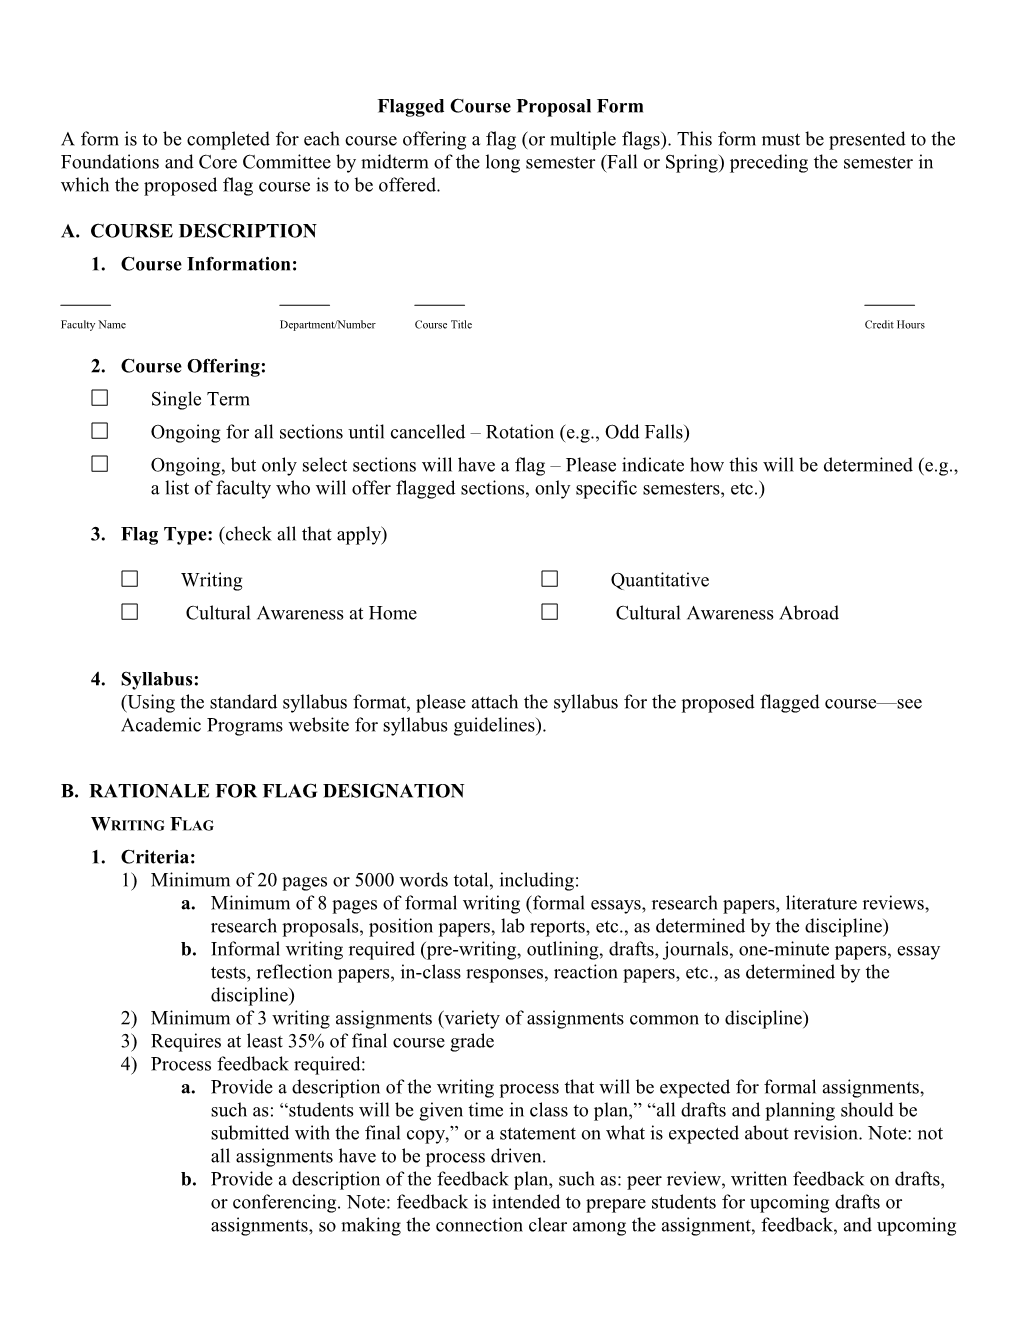 Flagged Course Proposal Form